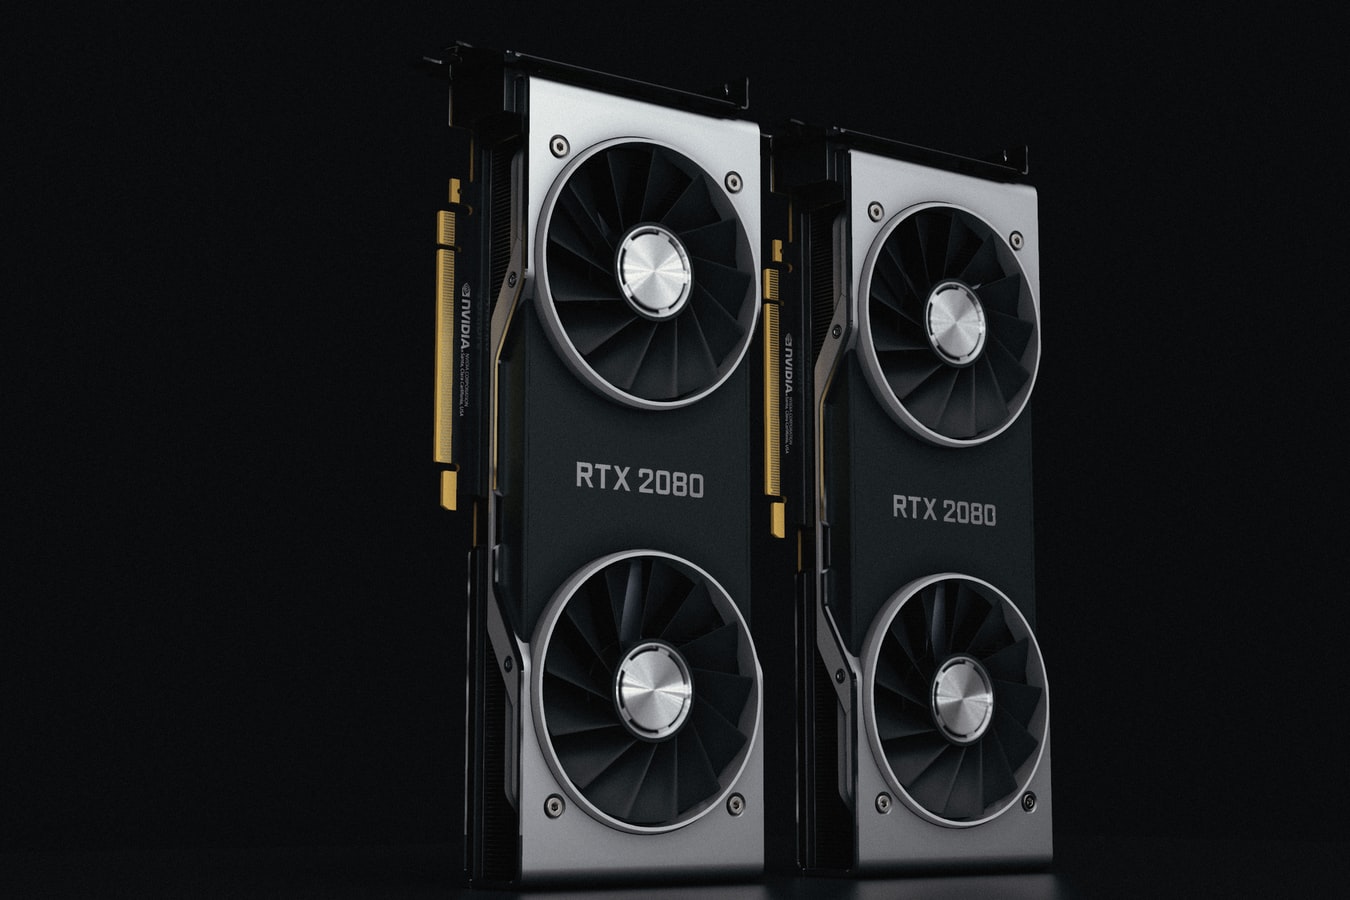 The RTX2080 graphics card is a great choice for deep learning projects.